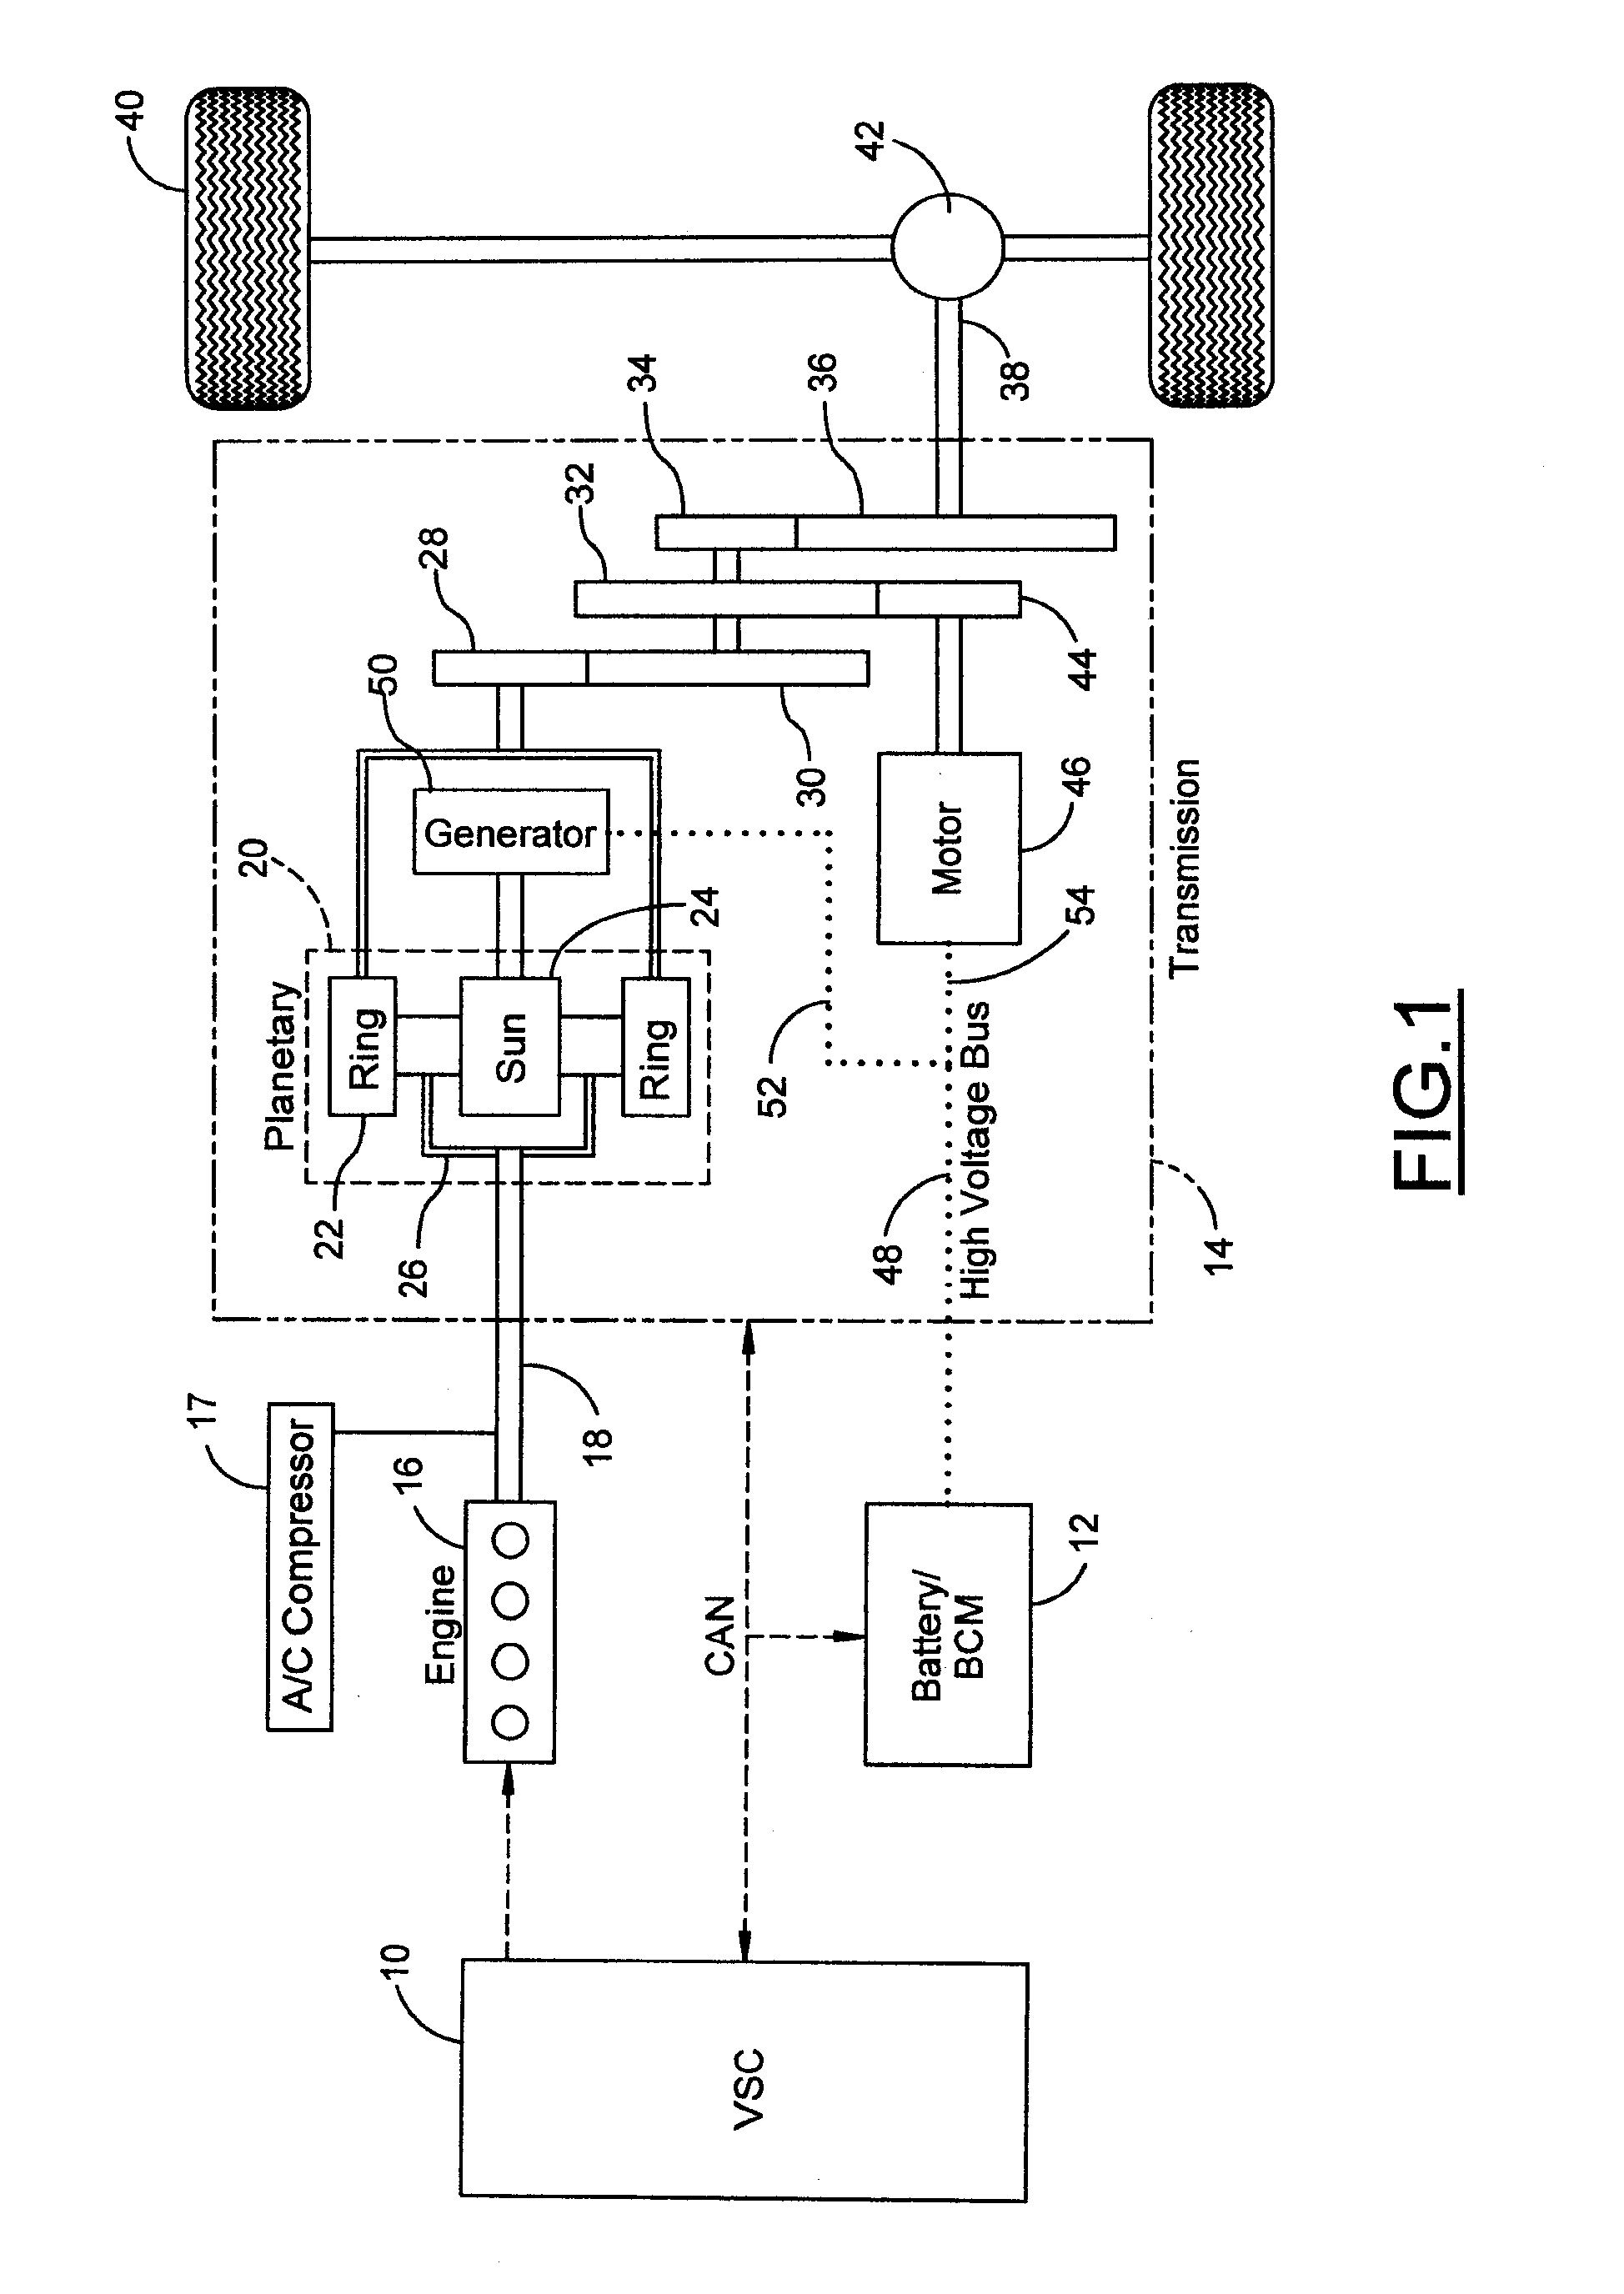 Method for compensating for accessory loading